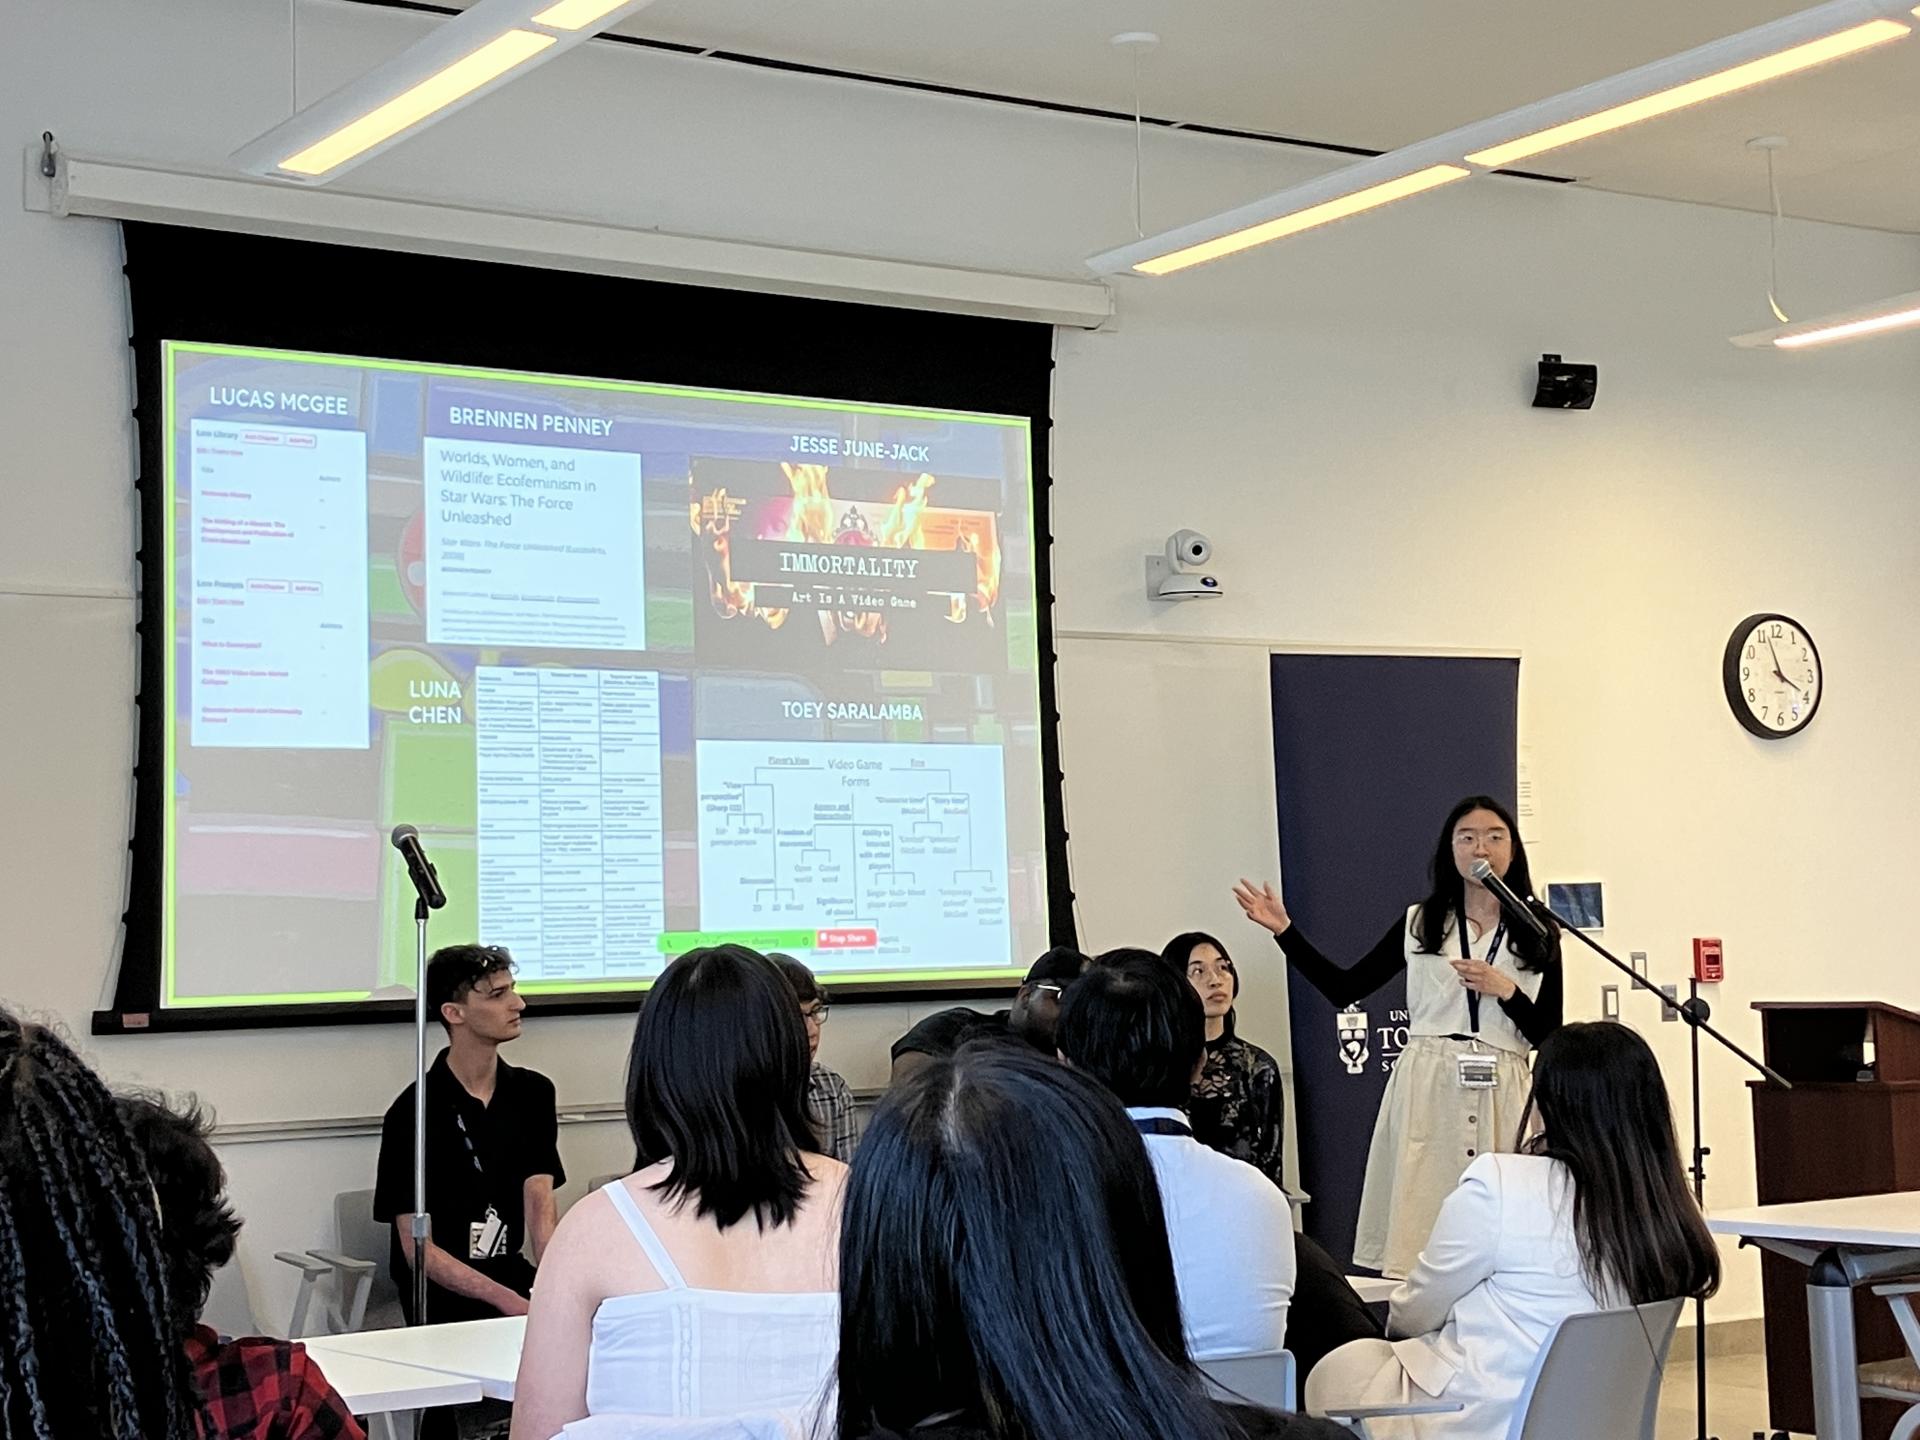 Student Toey Saralamba presenting a new resource for studying video games at a symposium.